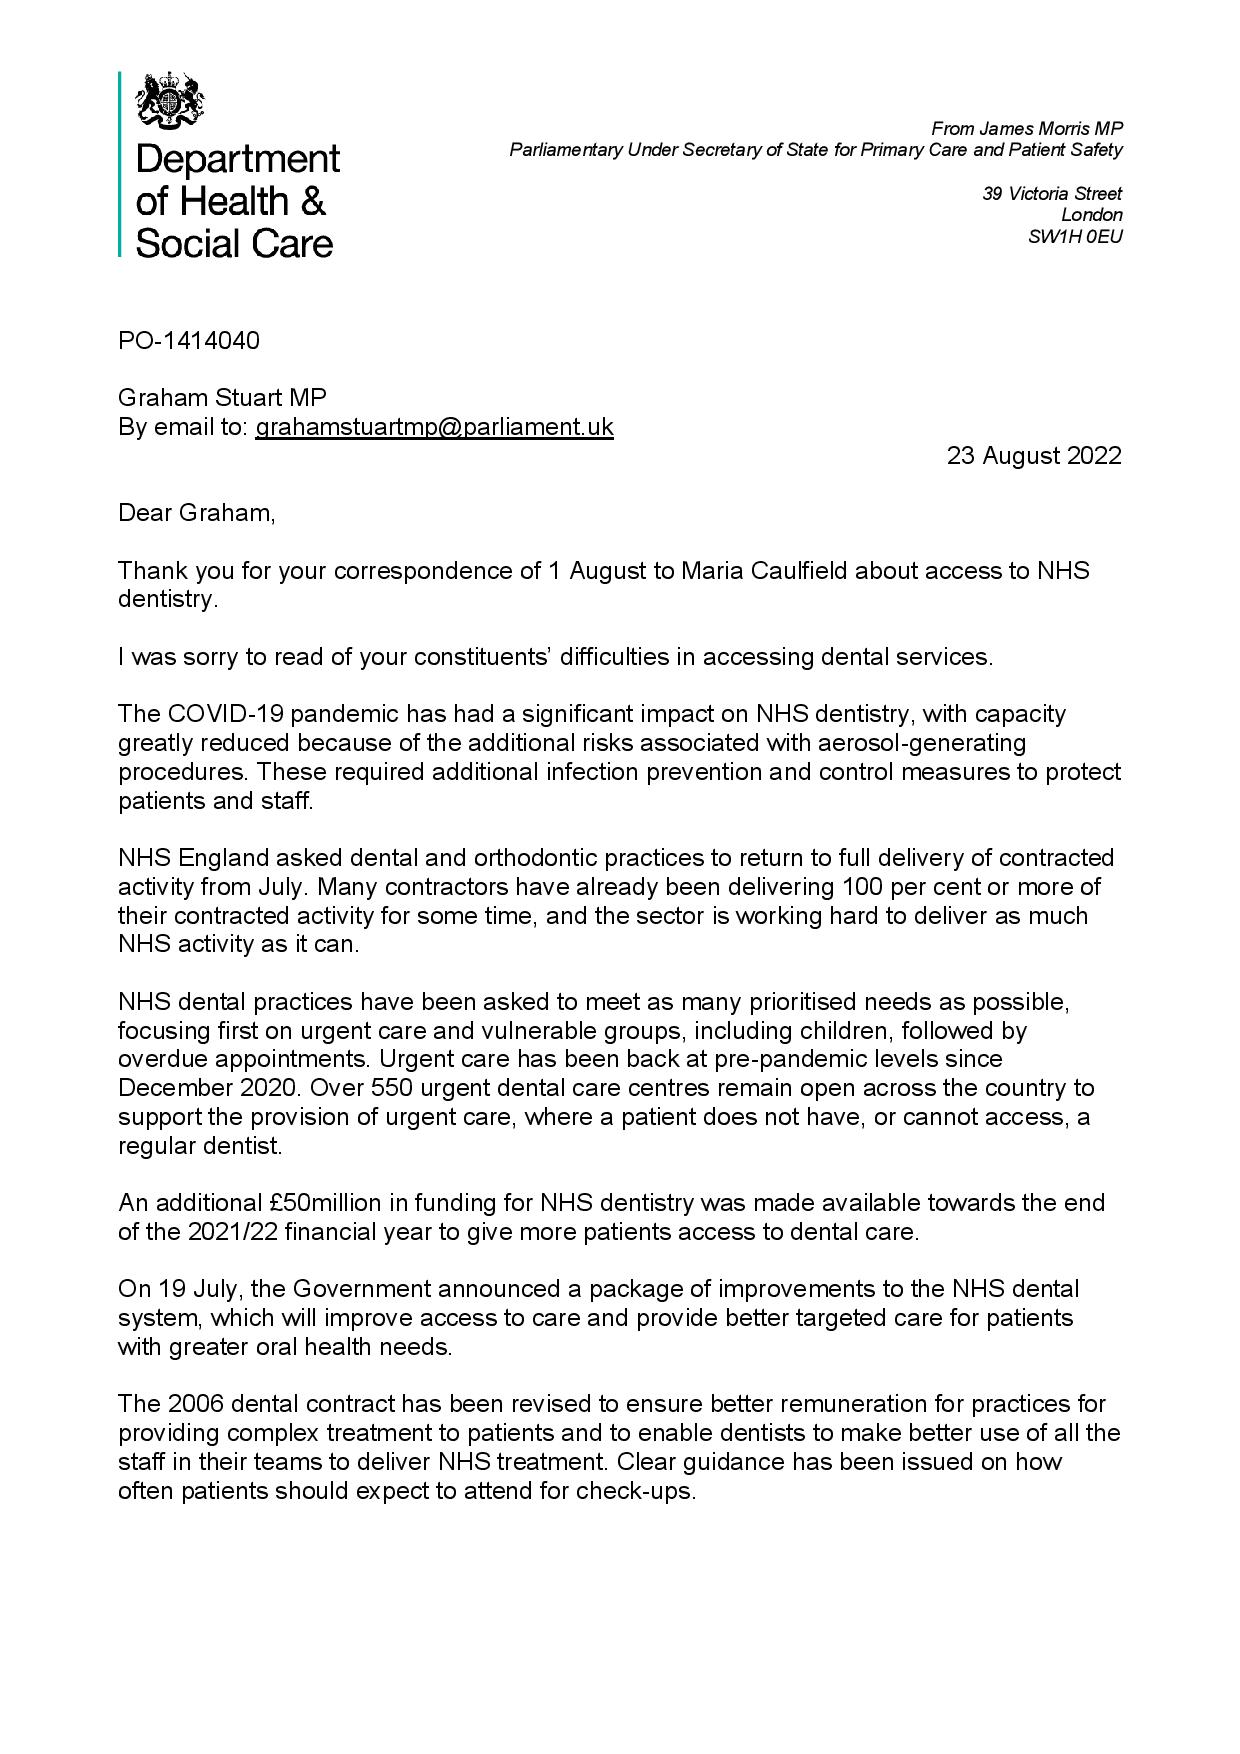 James Morris MP reply re. Dentists August 2022-page-001.jpg